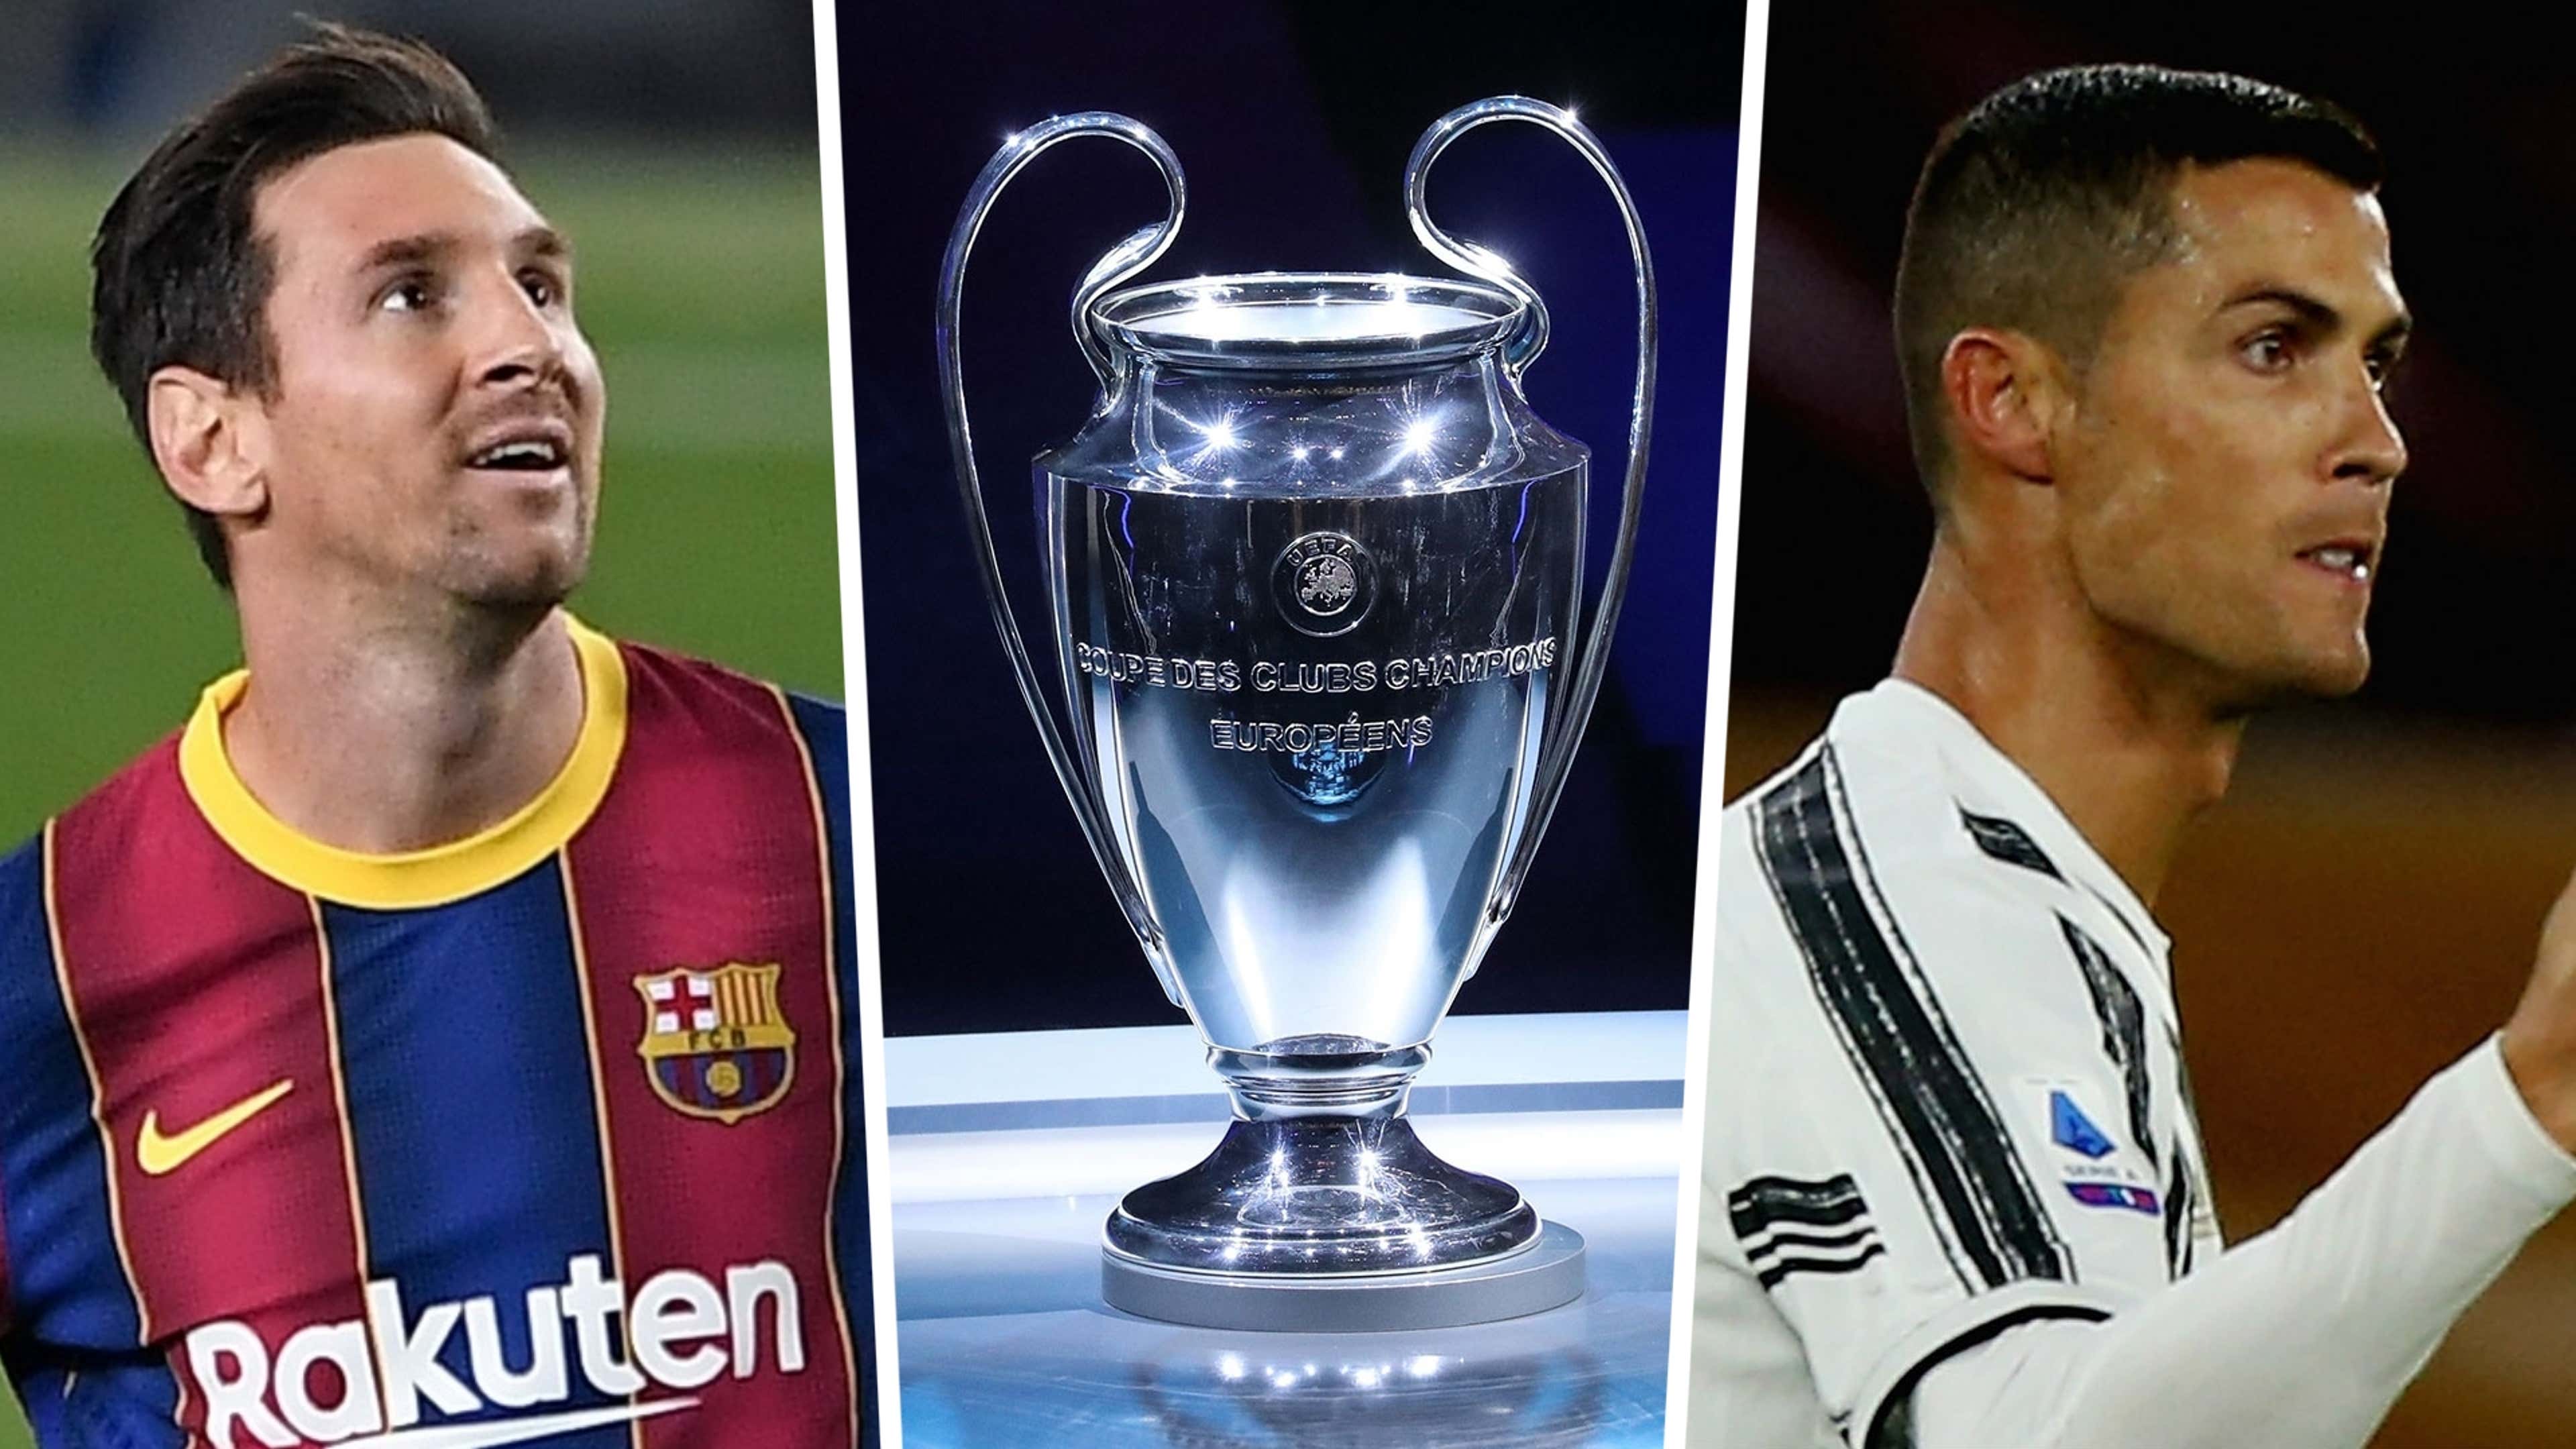 Champions League: Messi and Ronaldo will face each other, PSG to take on  Man Utd